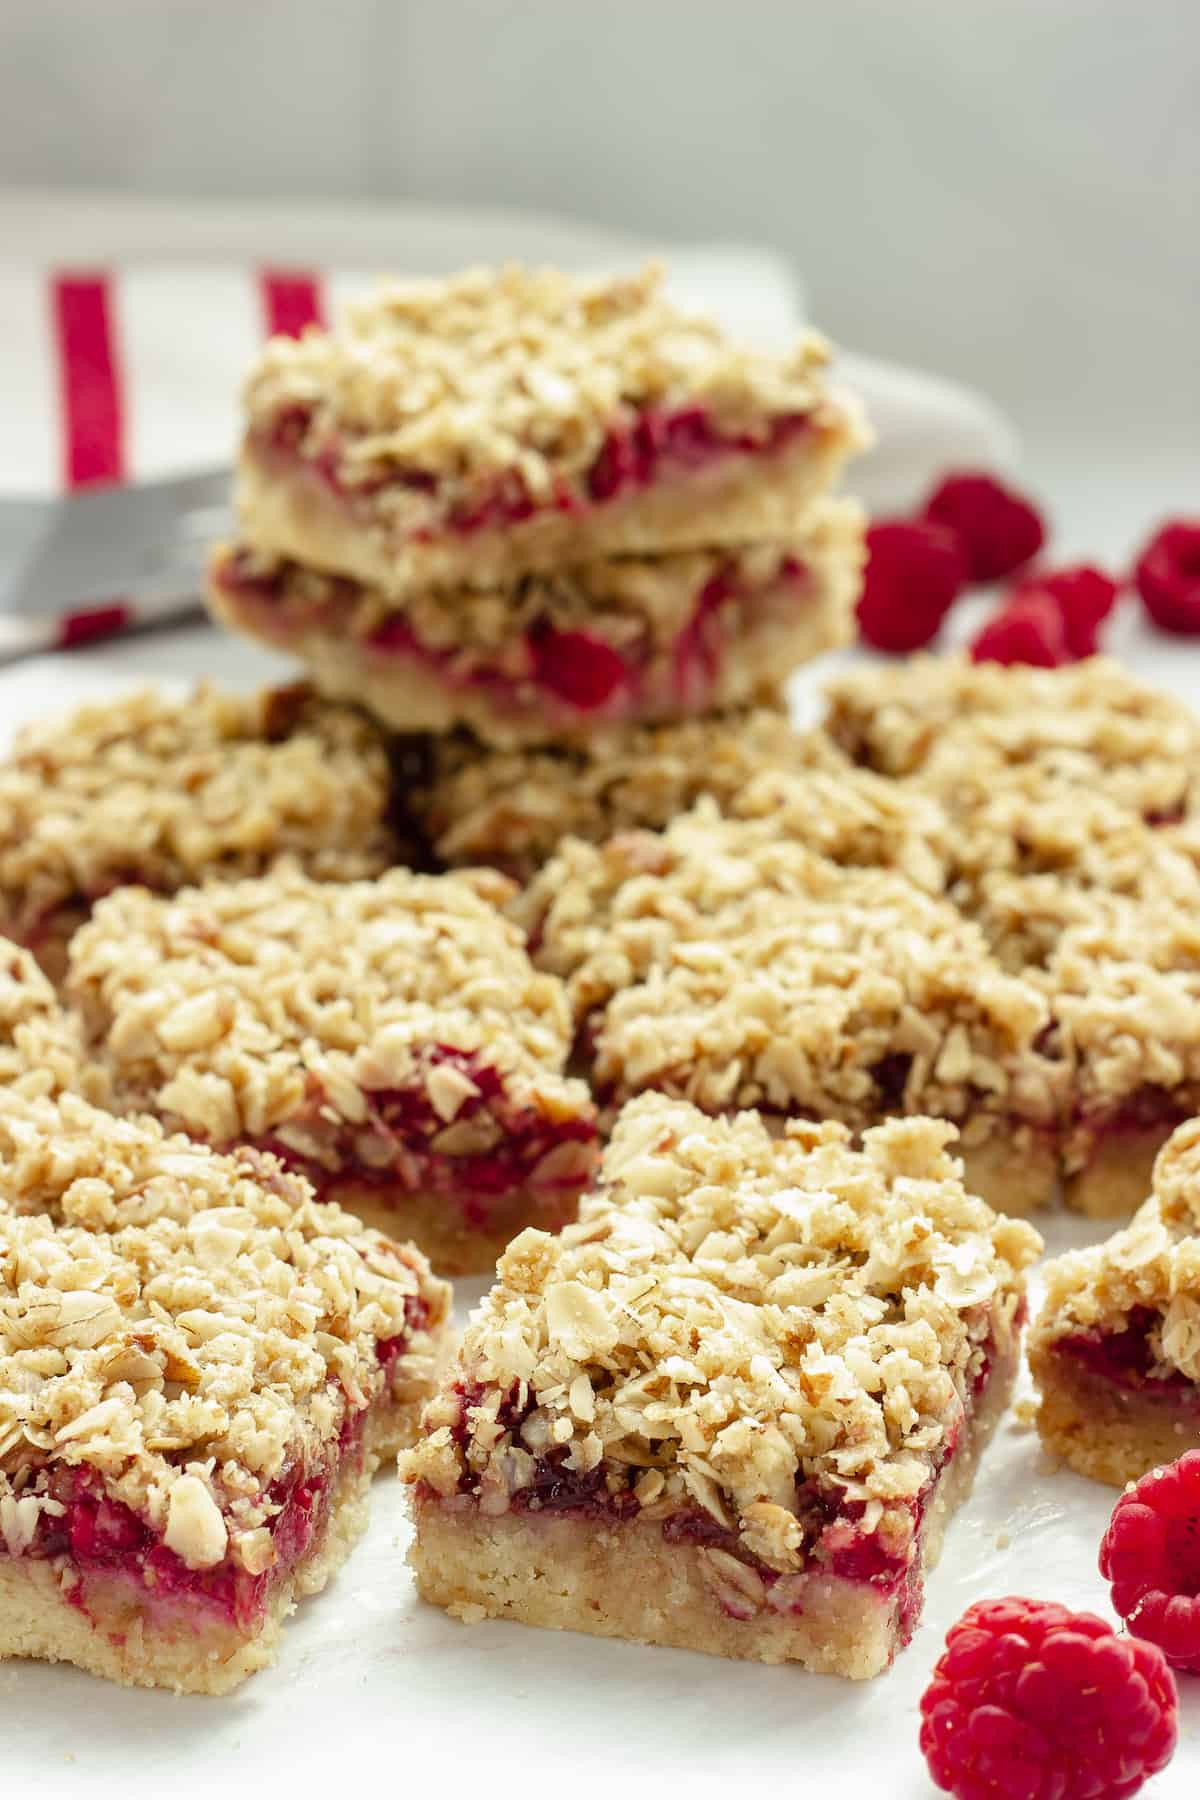 Raspberry oatmeal bars lined up on a sheet of parchment paper with fresh raspberries in the foreground and background.